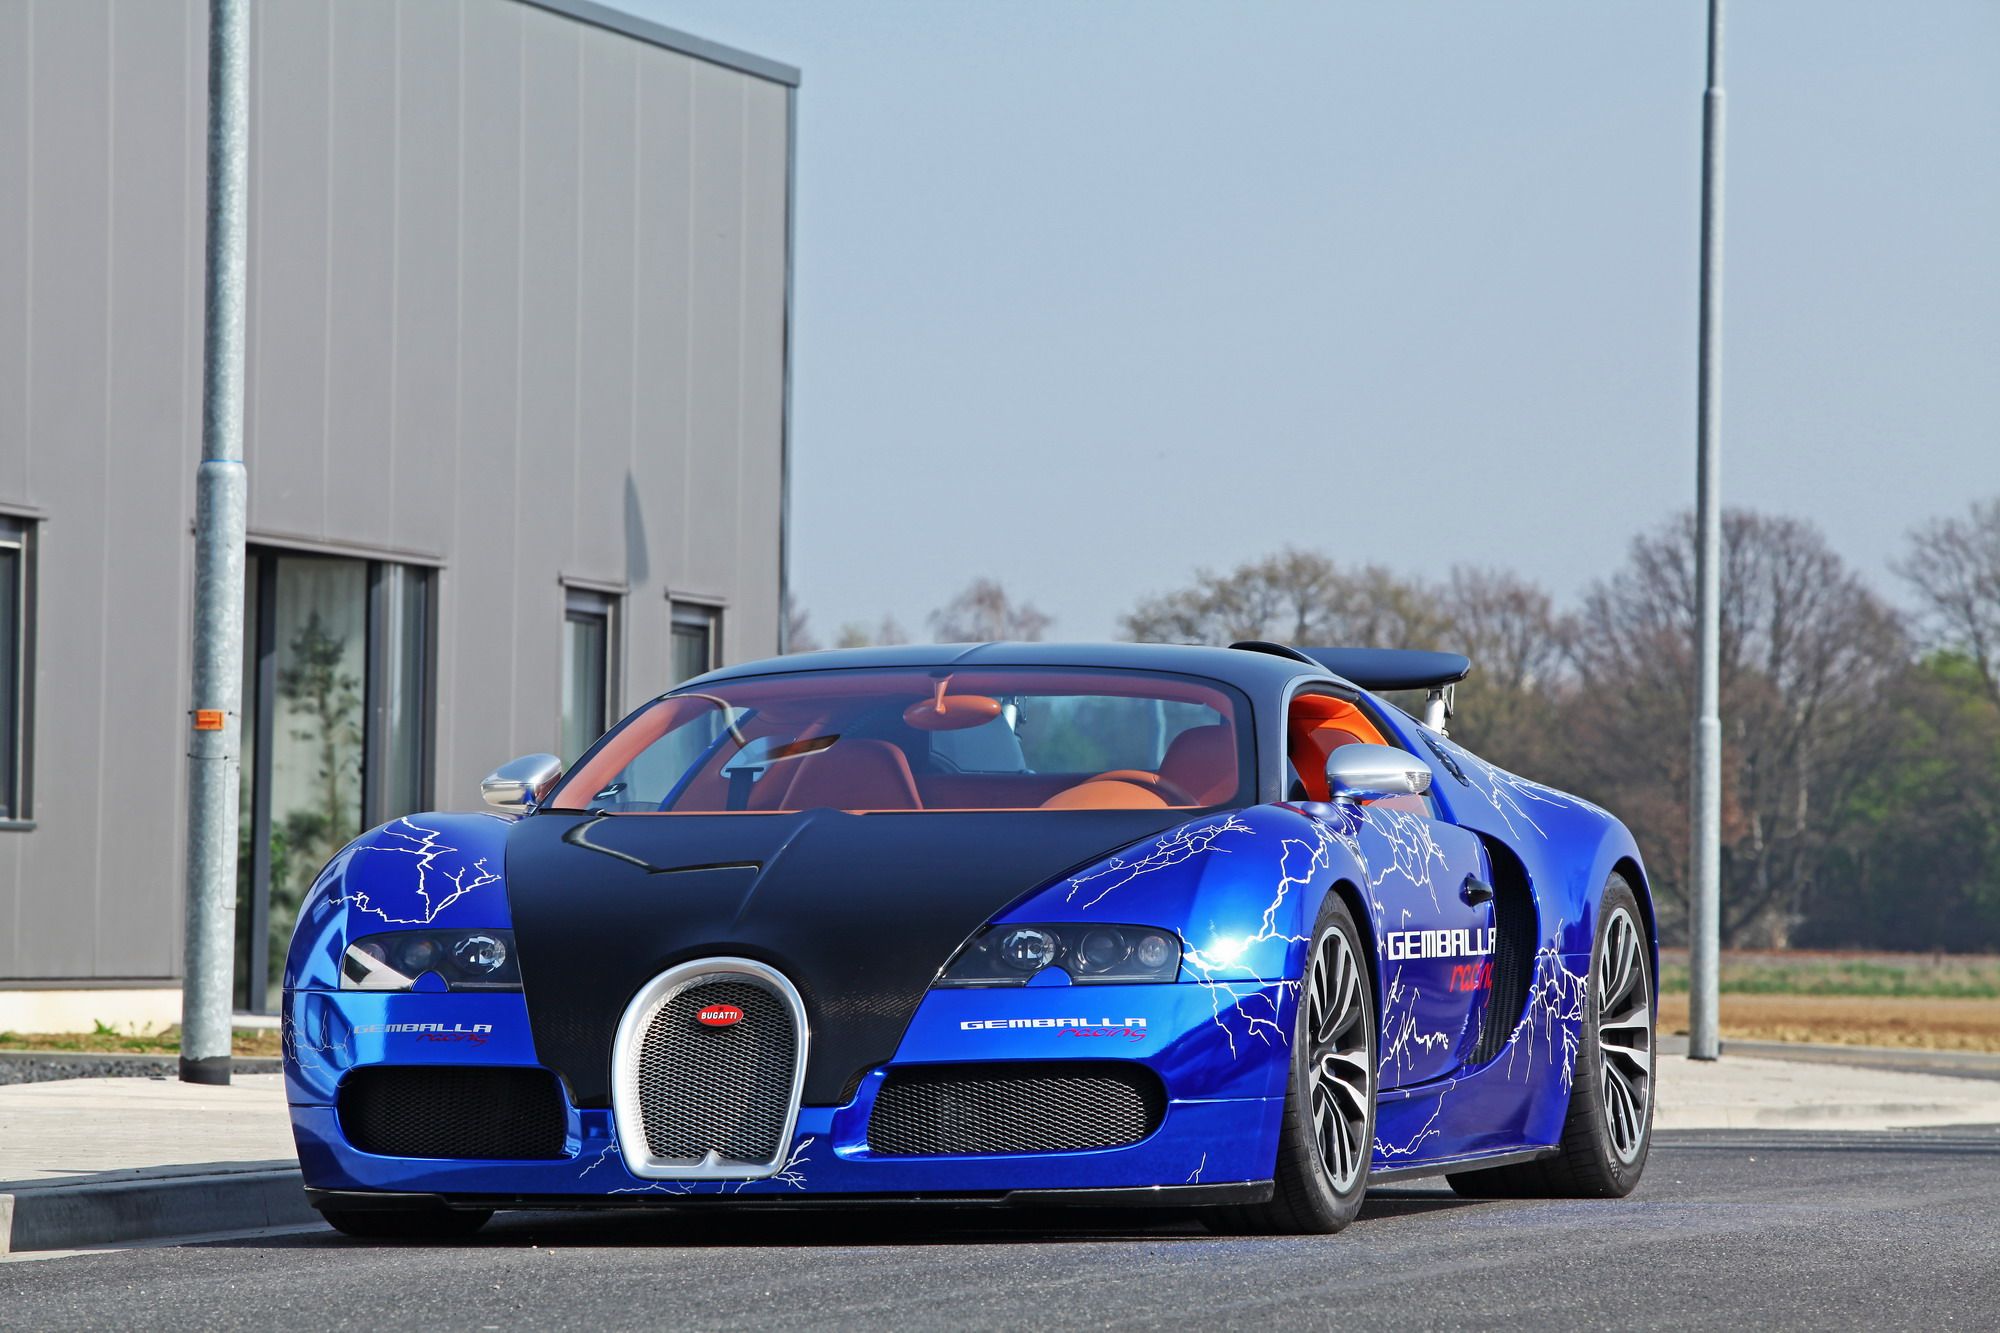 2012 Bugatti Veyron Sang Gemballa Blue by Gemballa Racing and Cam Shaft